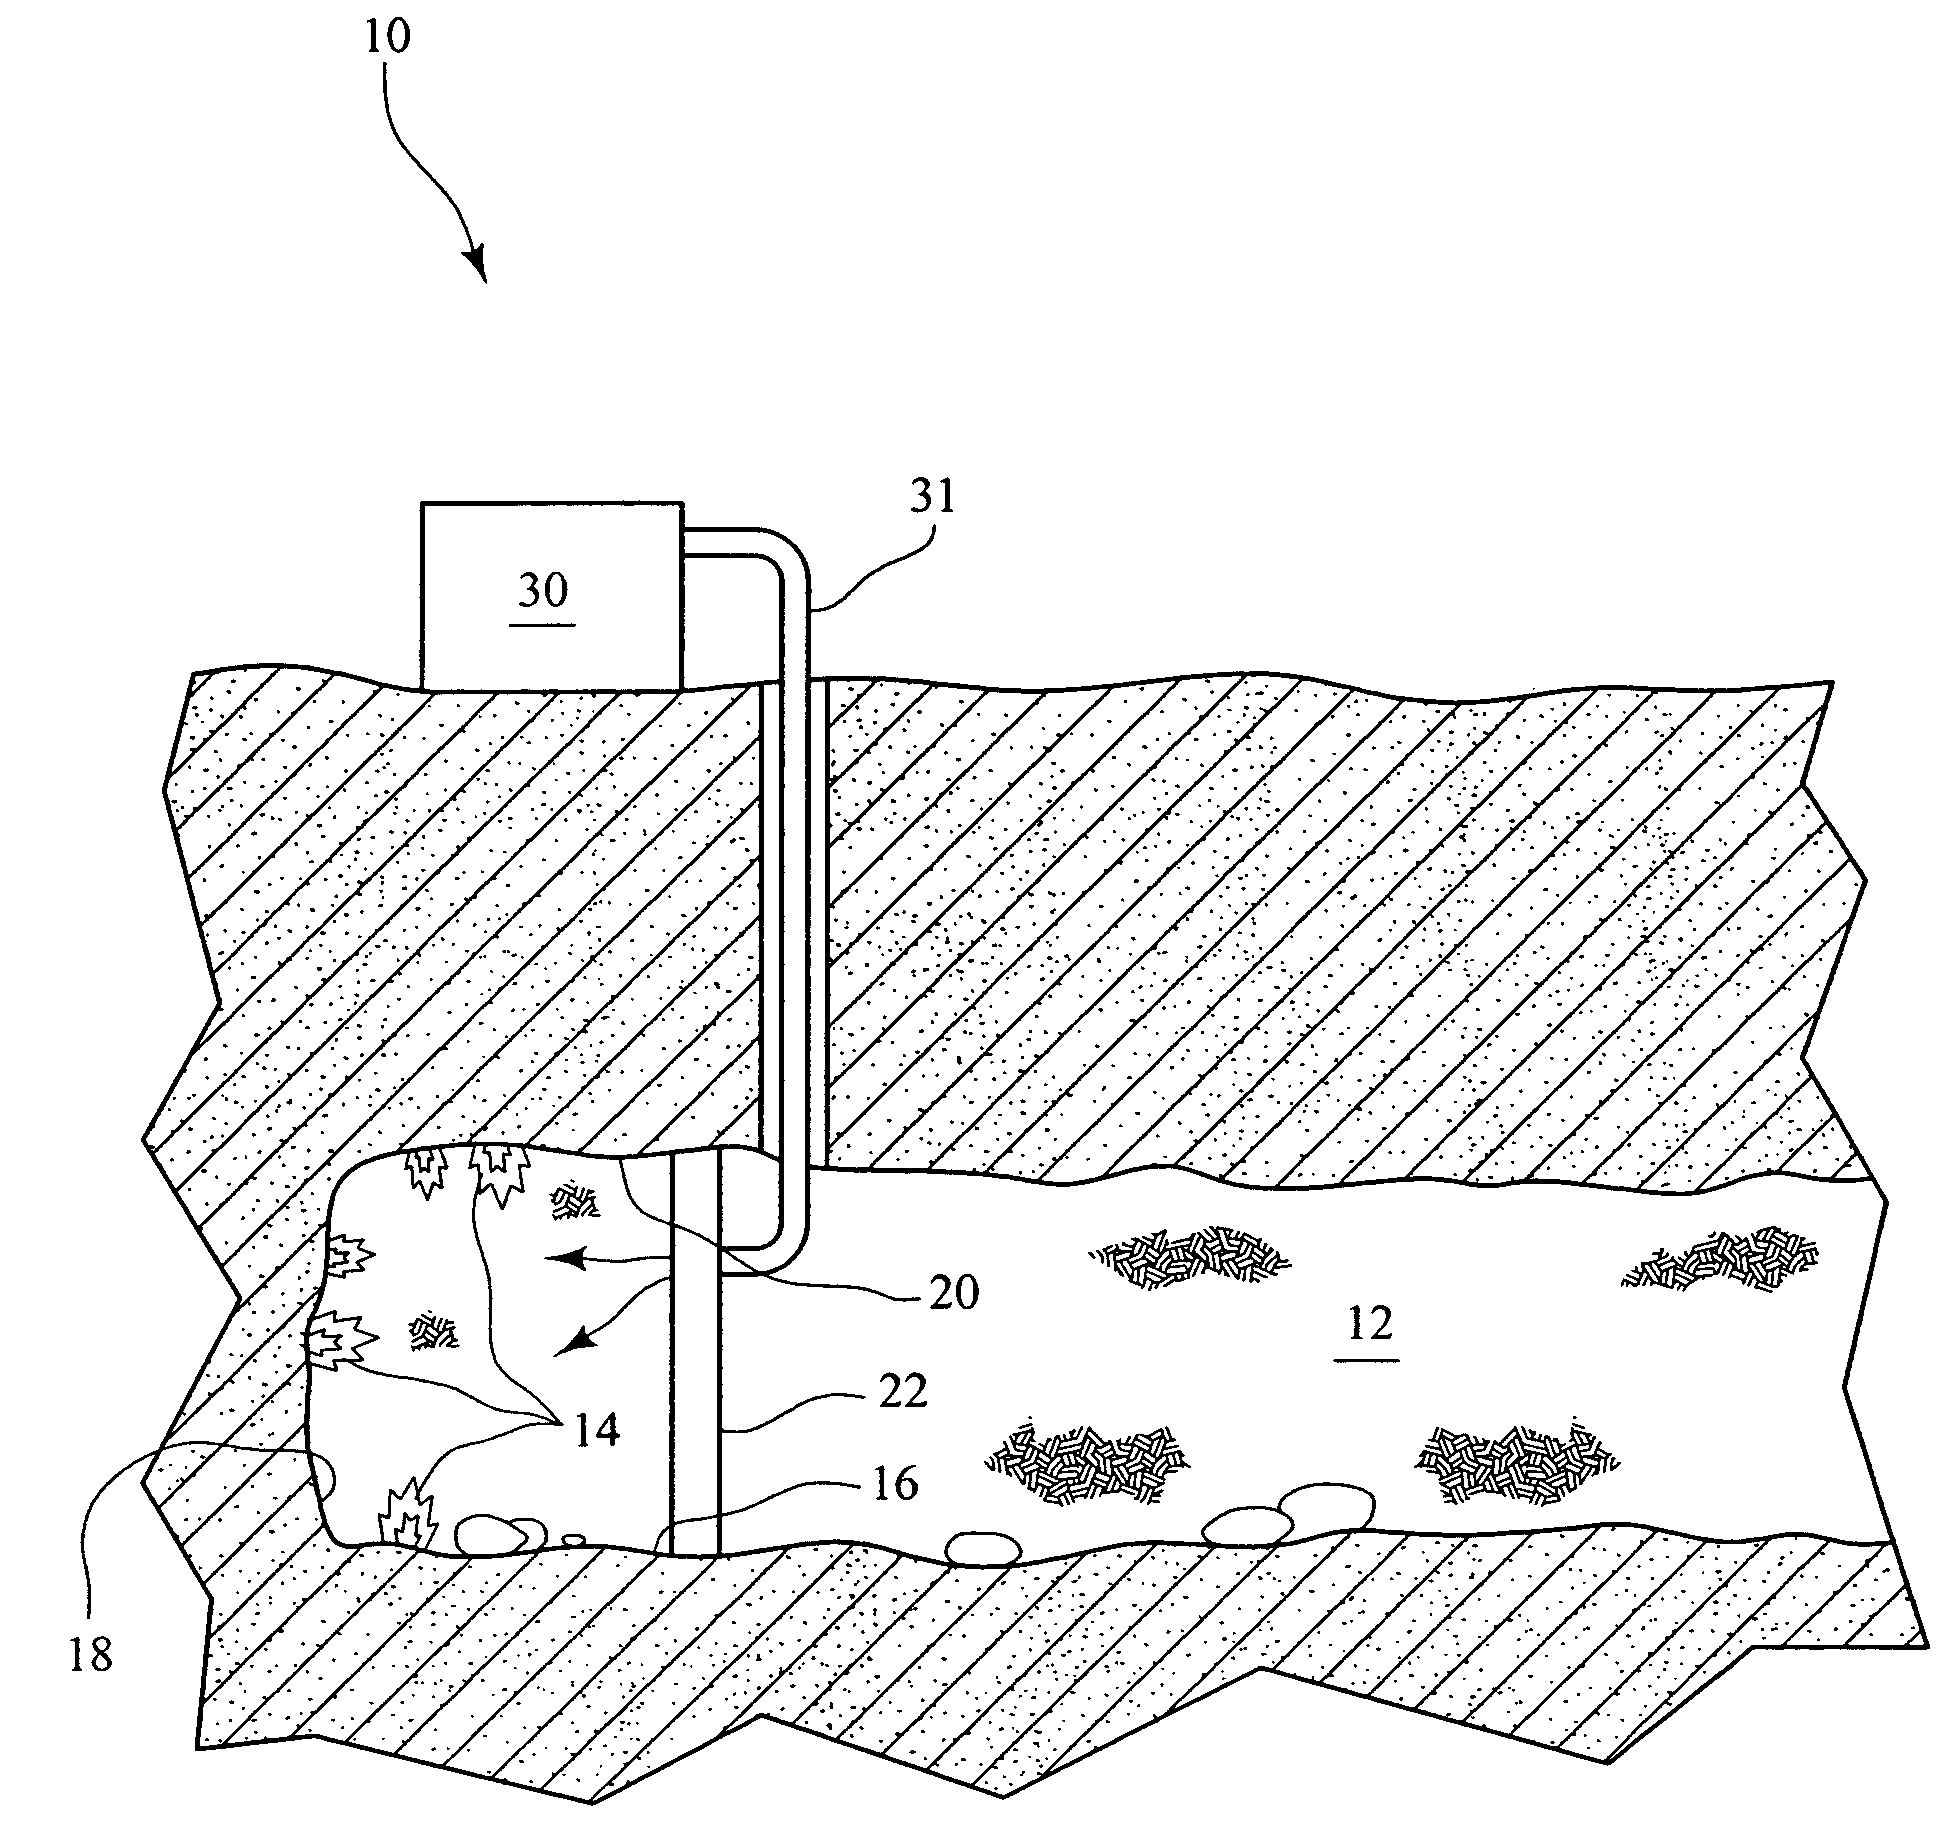 Method for fighting fire in confined areas using nitrogen expanded foam